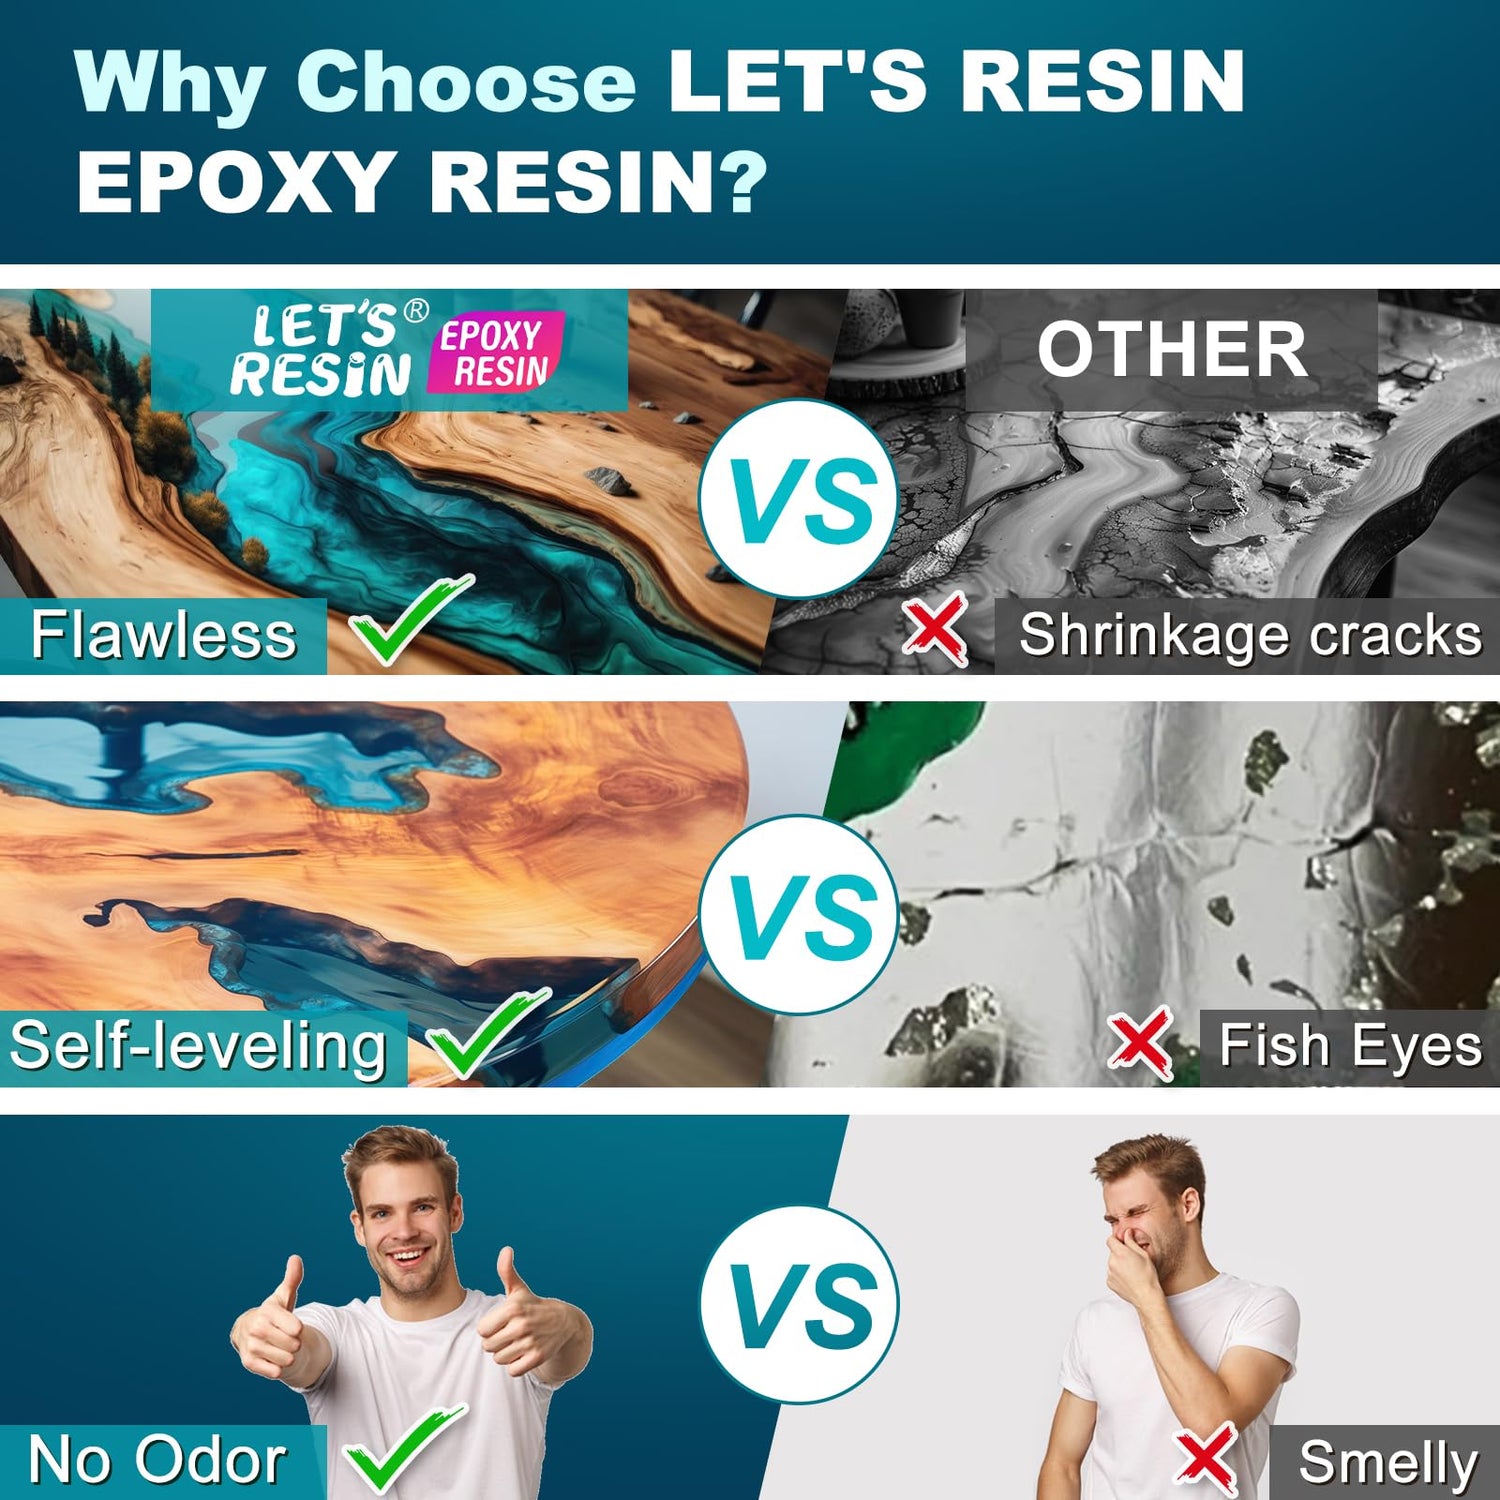 Reasons to choose Let‘s Resin